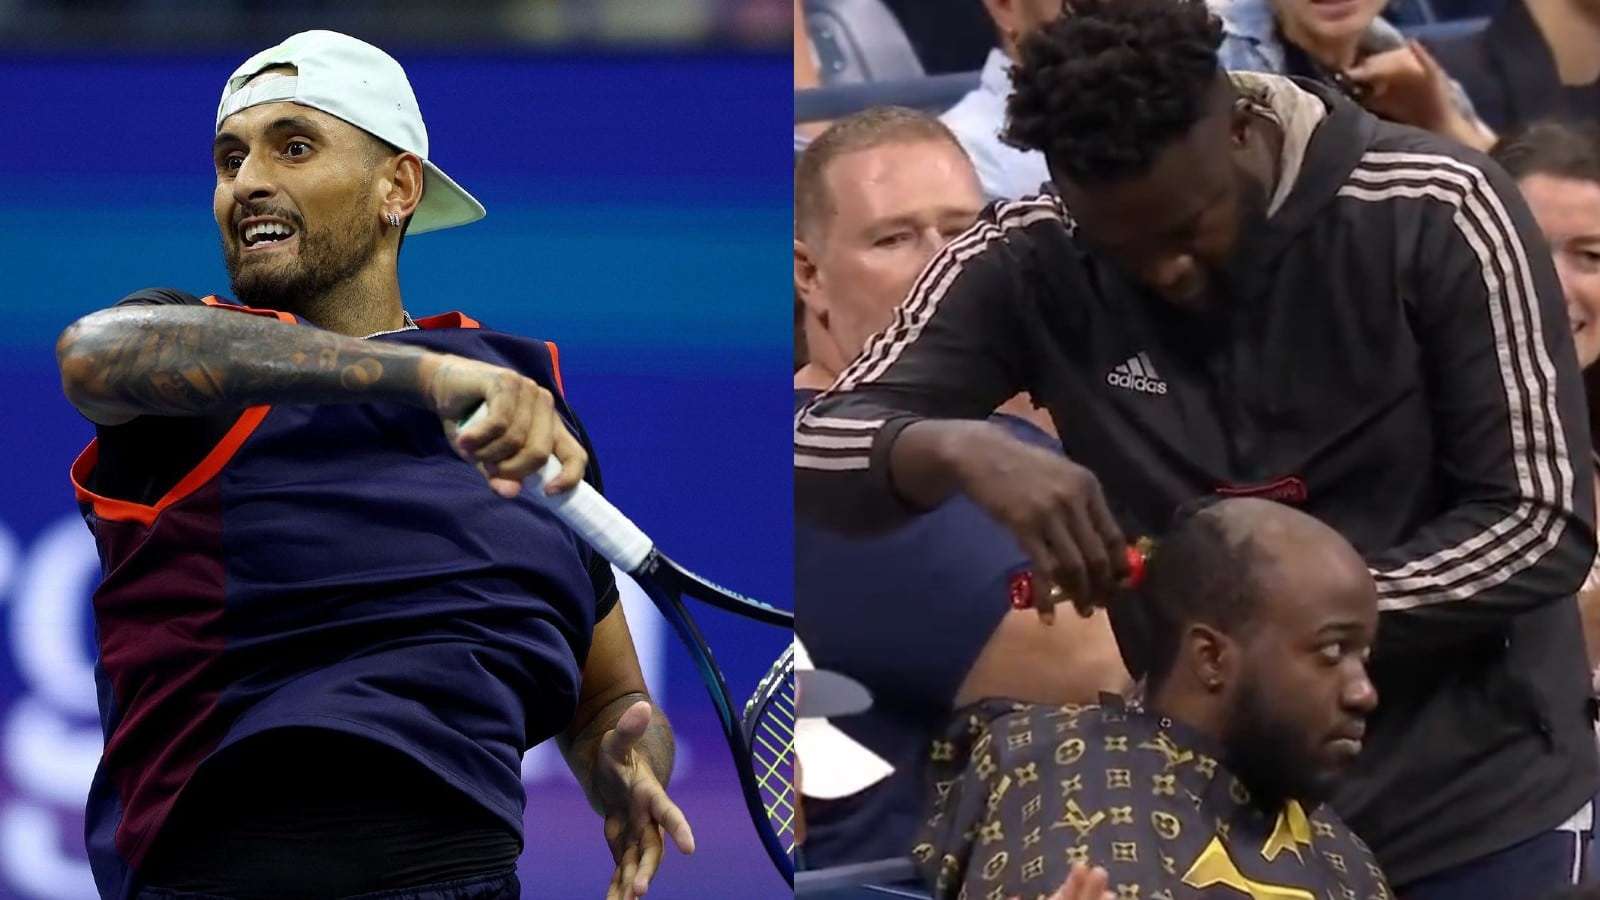 JiDion got a haircut at the US Open.